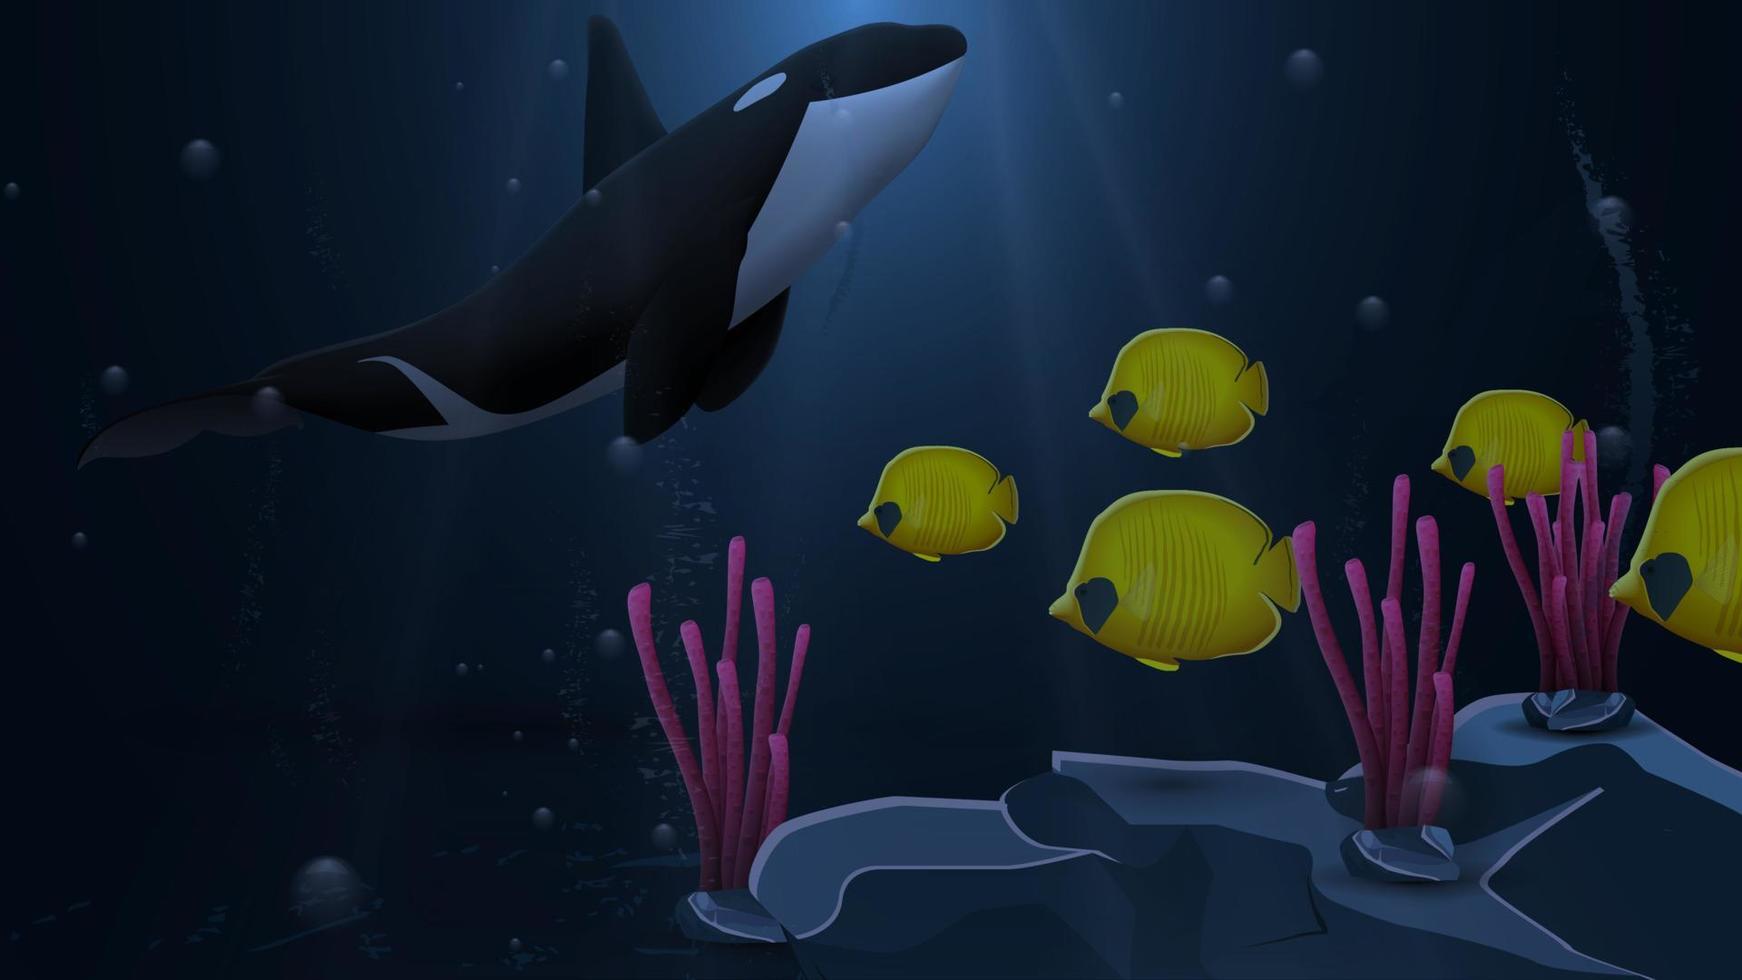 Underwater world with killer whale and yellow fish, vector illustration